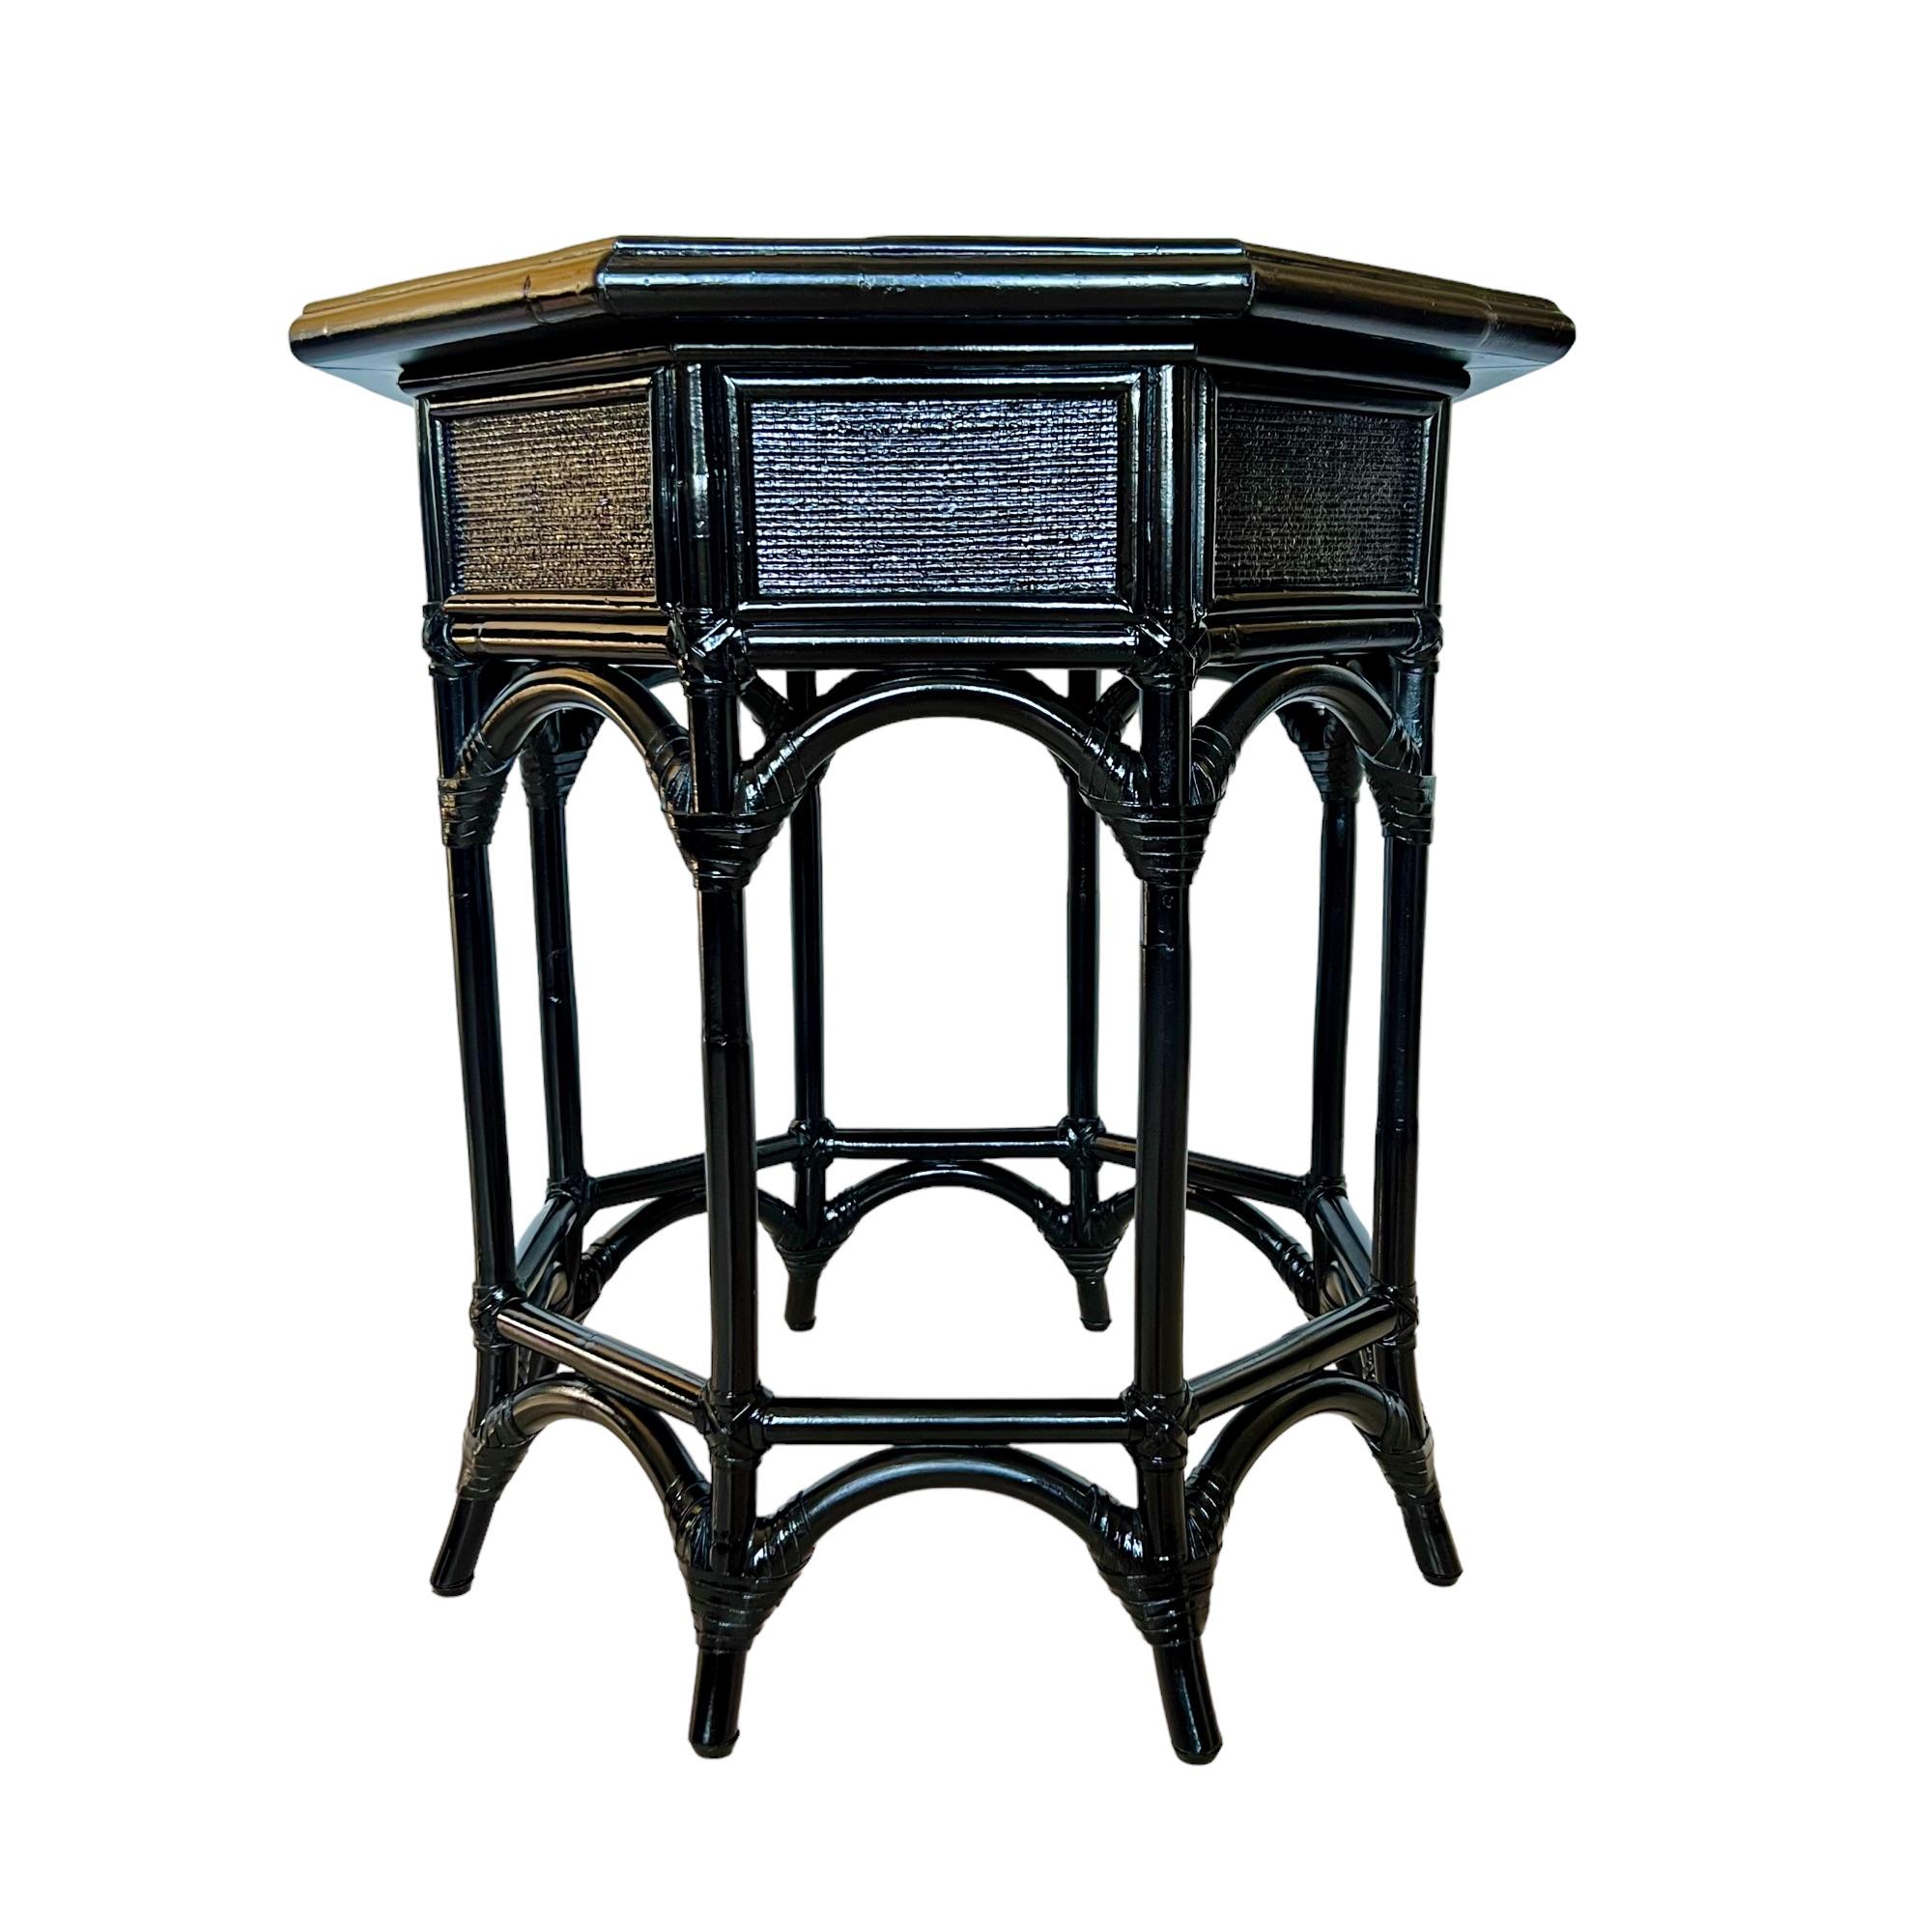 Leather Vintage Refinished Black Rattan Resin Top Octagon Side Tables, a Pair For Sale